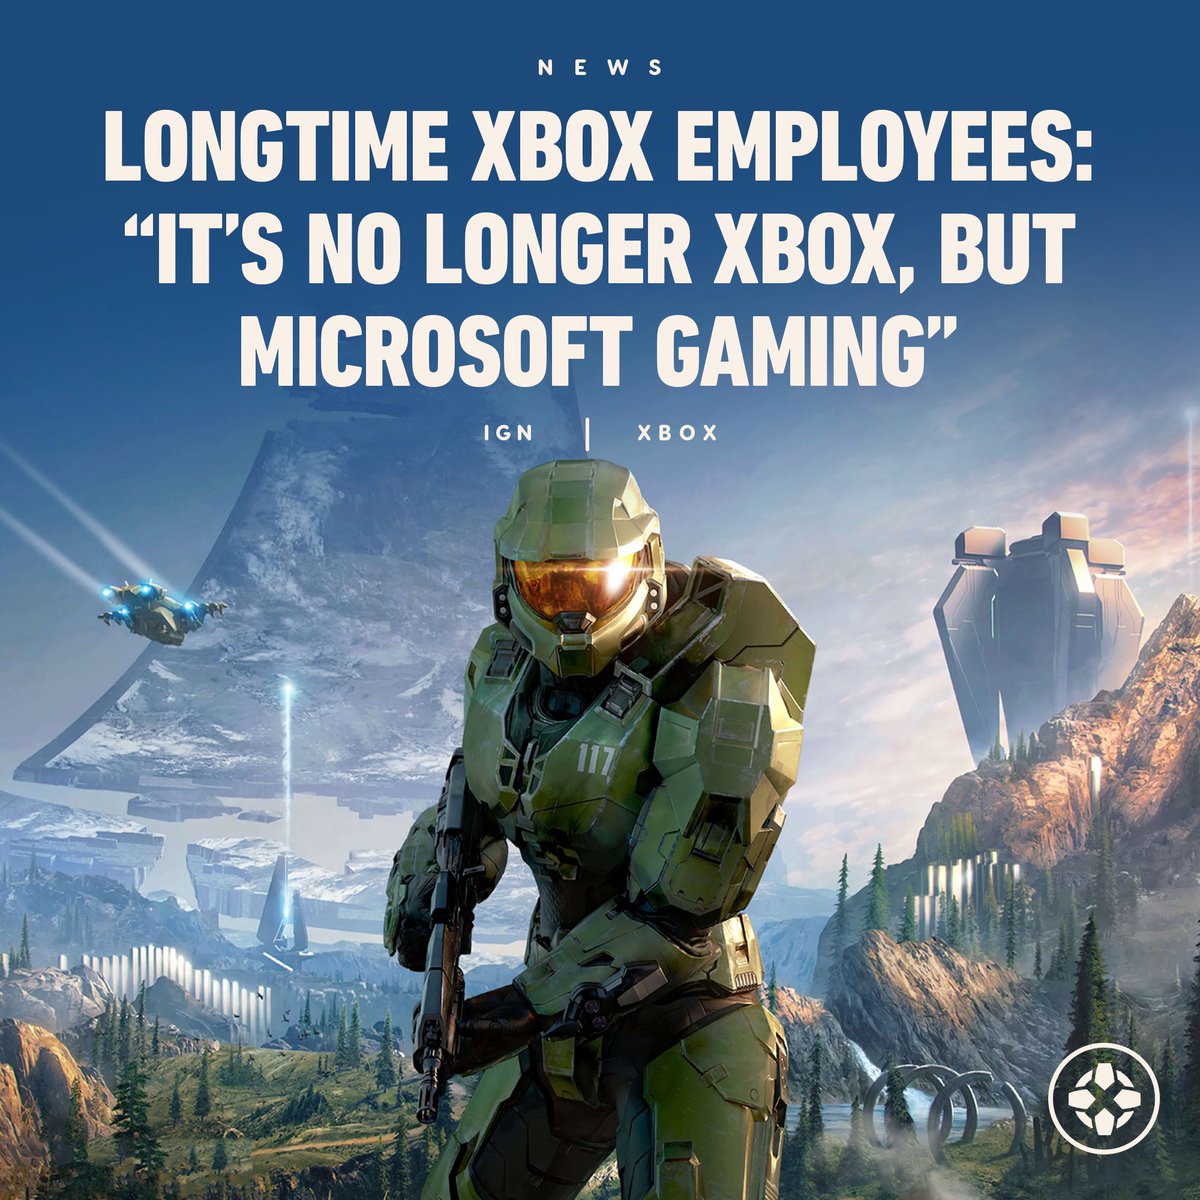 We sat down with longtime Xbox employees to get their thoughts on the direction of the brand today amidst recent layoffs and studio closures: bit.ly/3QFNDcJ